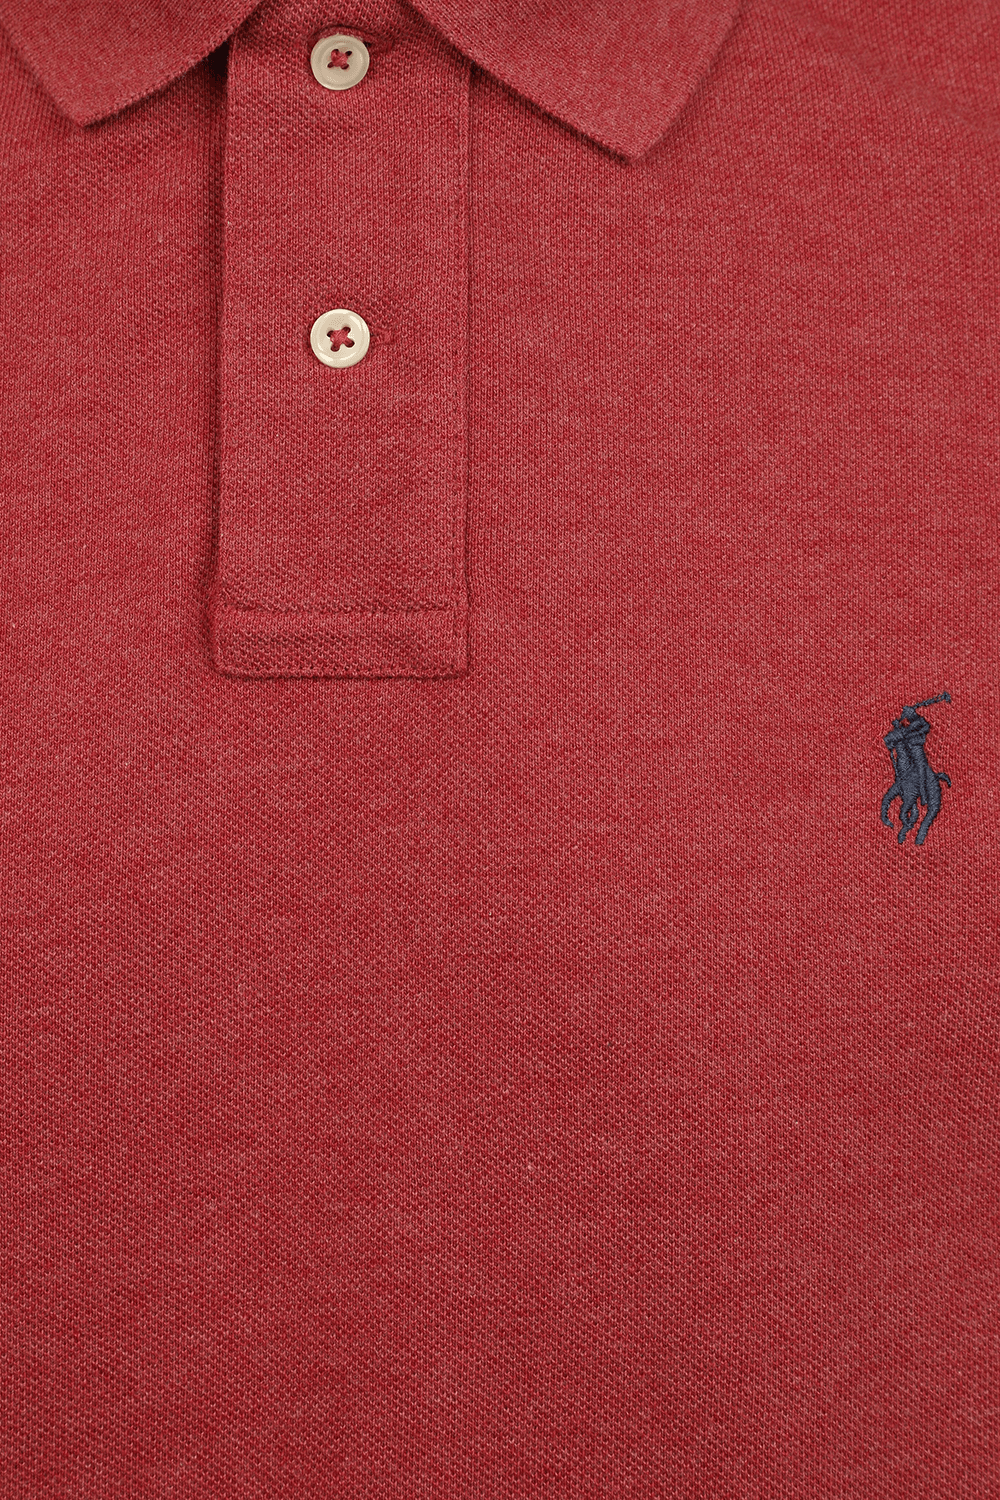 Short Sleeve 2 Buttons Polo Shirt in Red POLO RALPH LAUREN